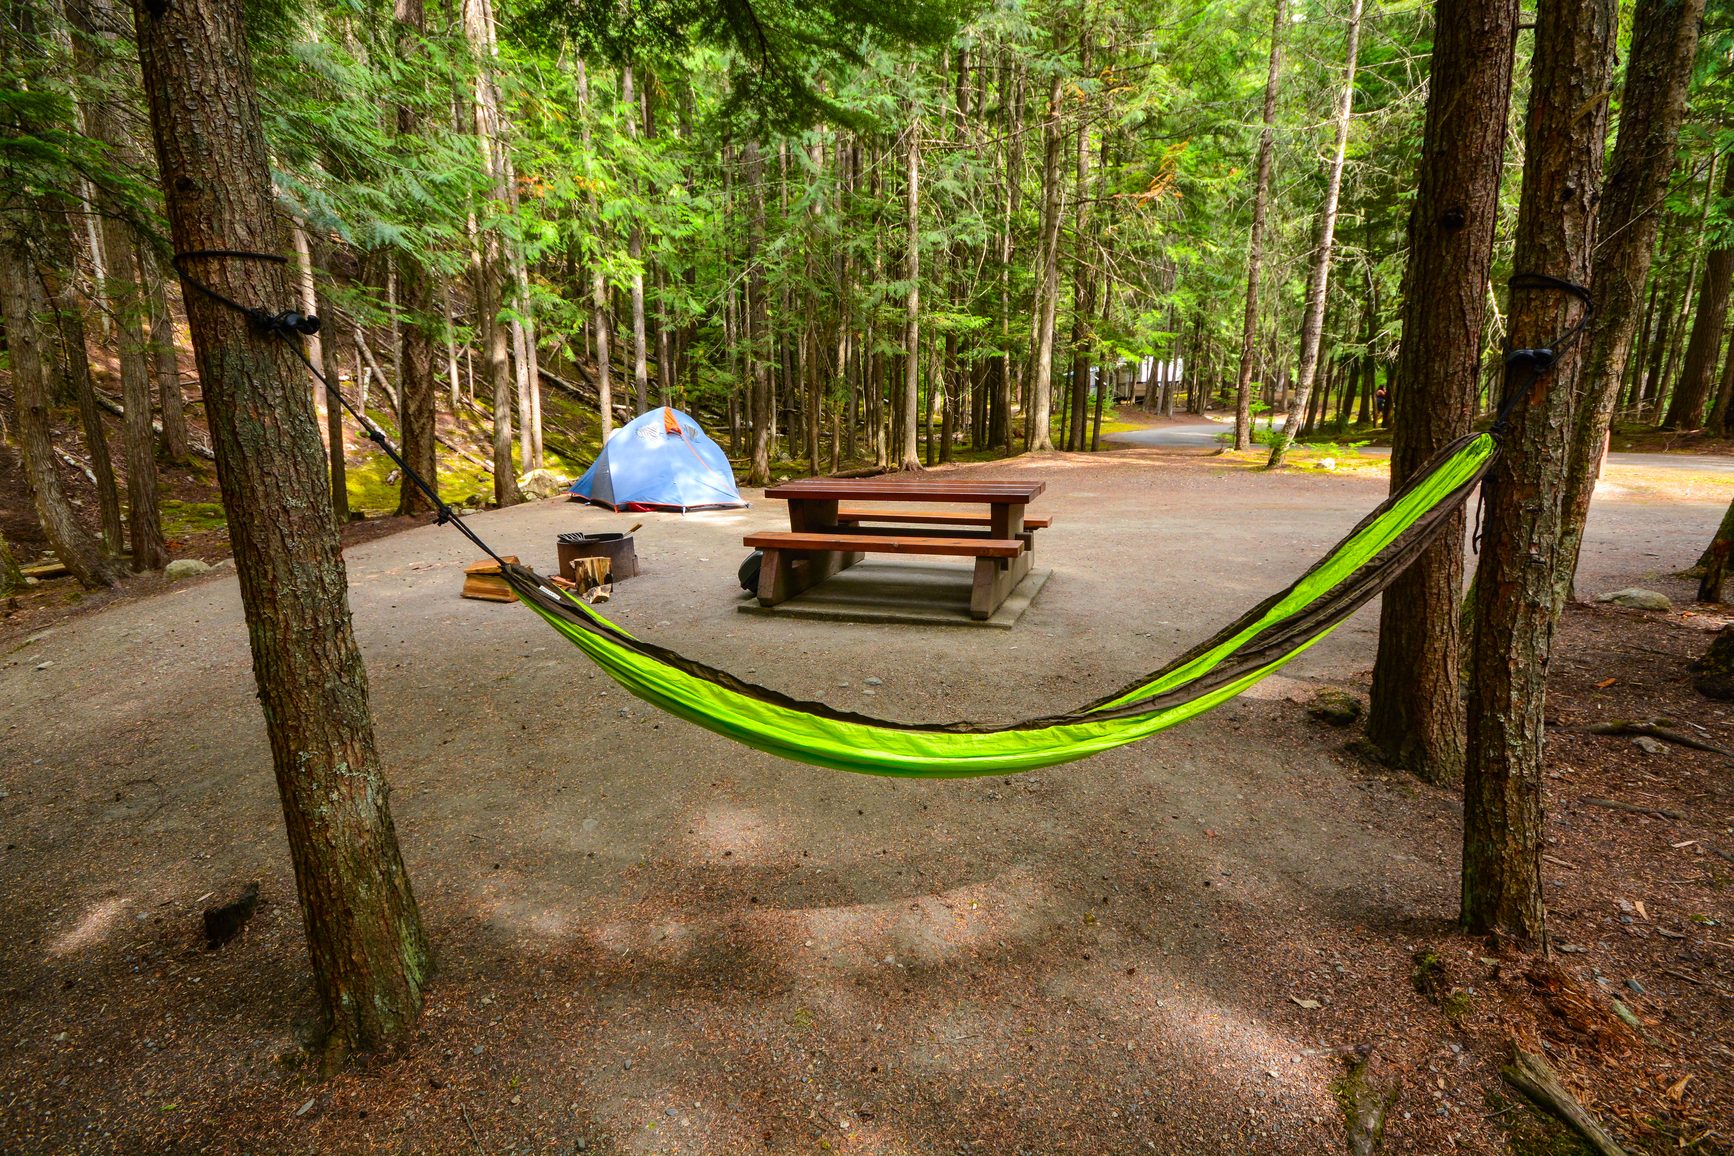 View of campsite and tent with a hammock between two trees.